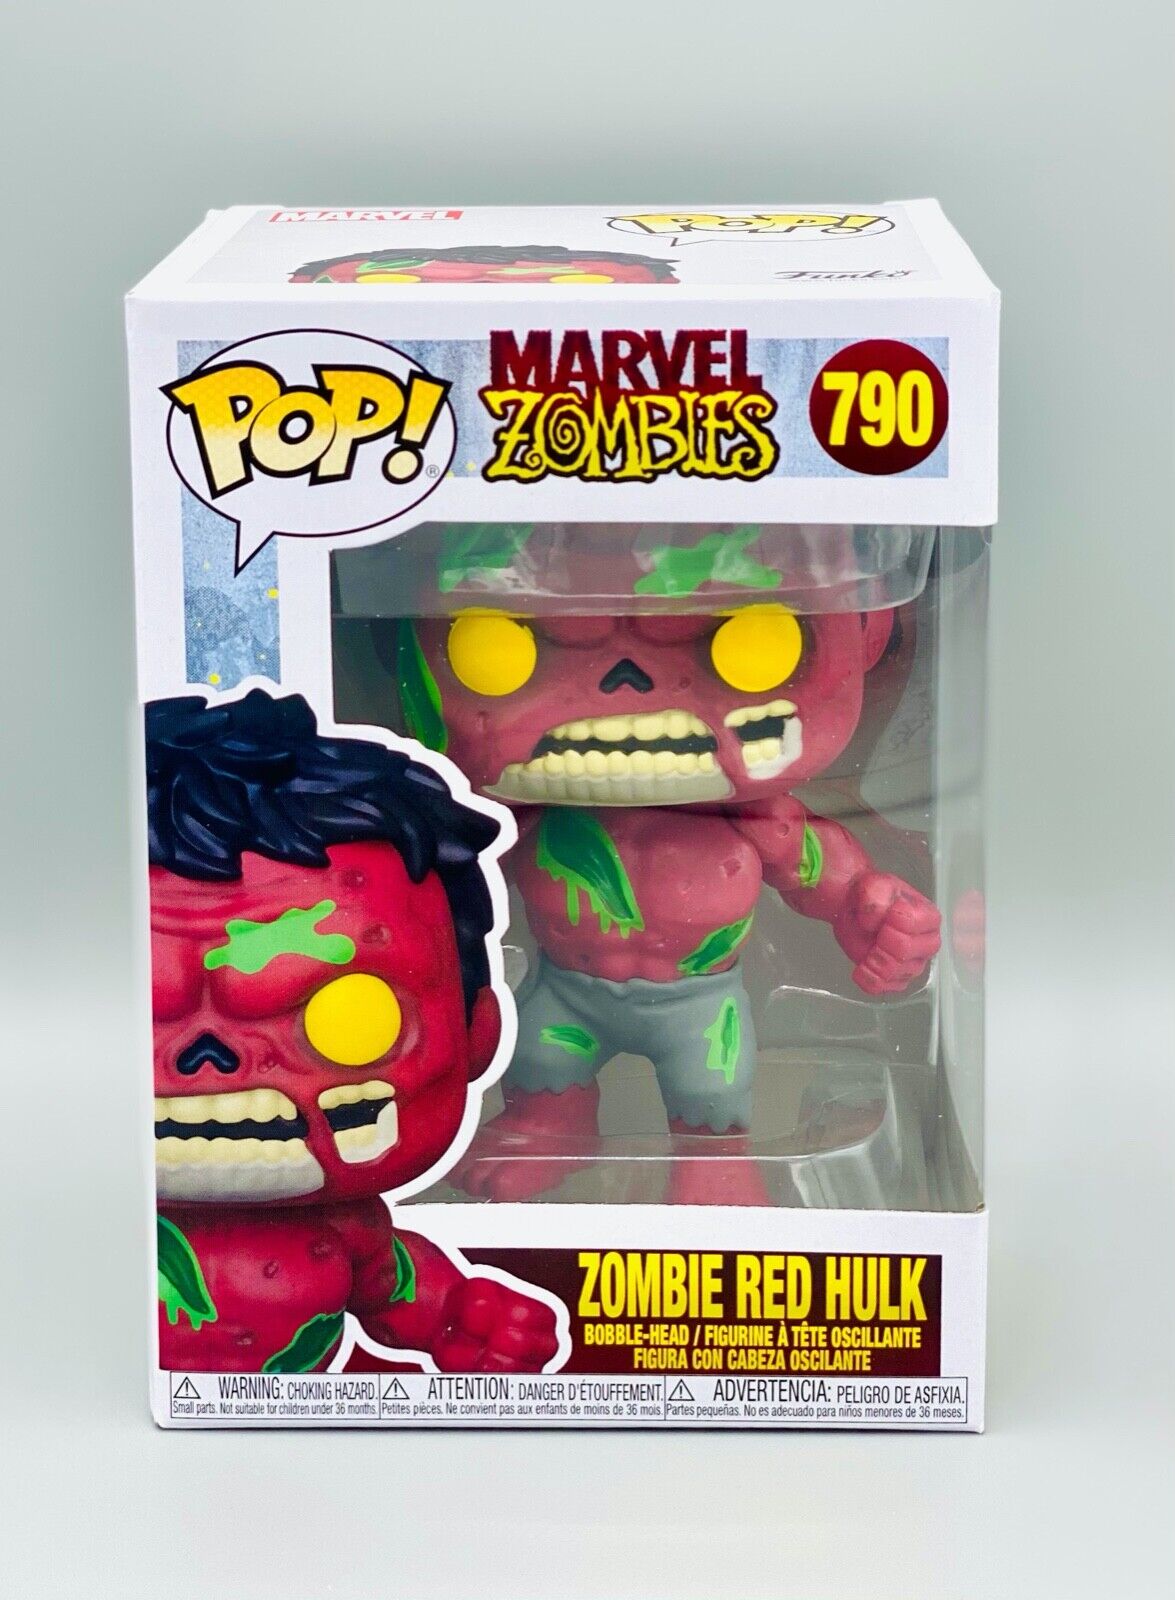 MINT Marvel Zombies Red Hulk Funko Pop Figure #790 with ECO Protector IN STOCK